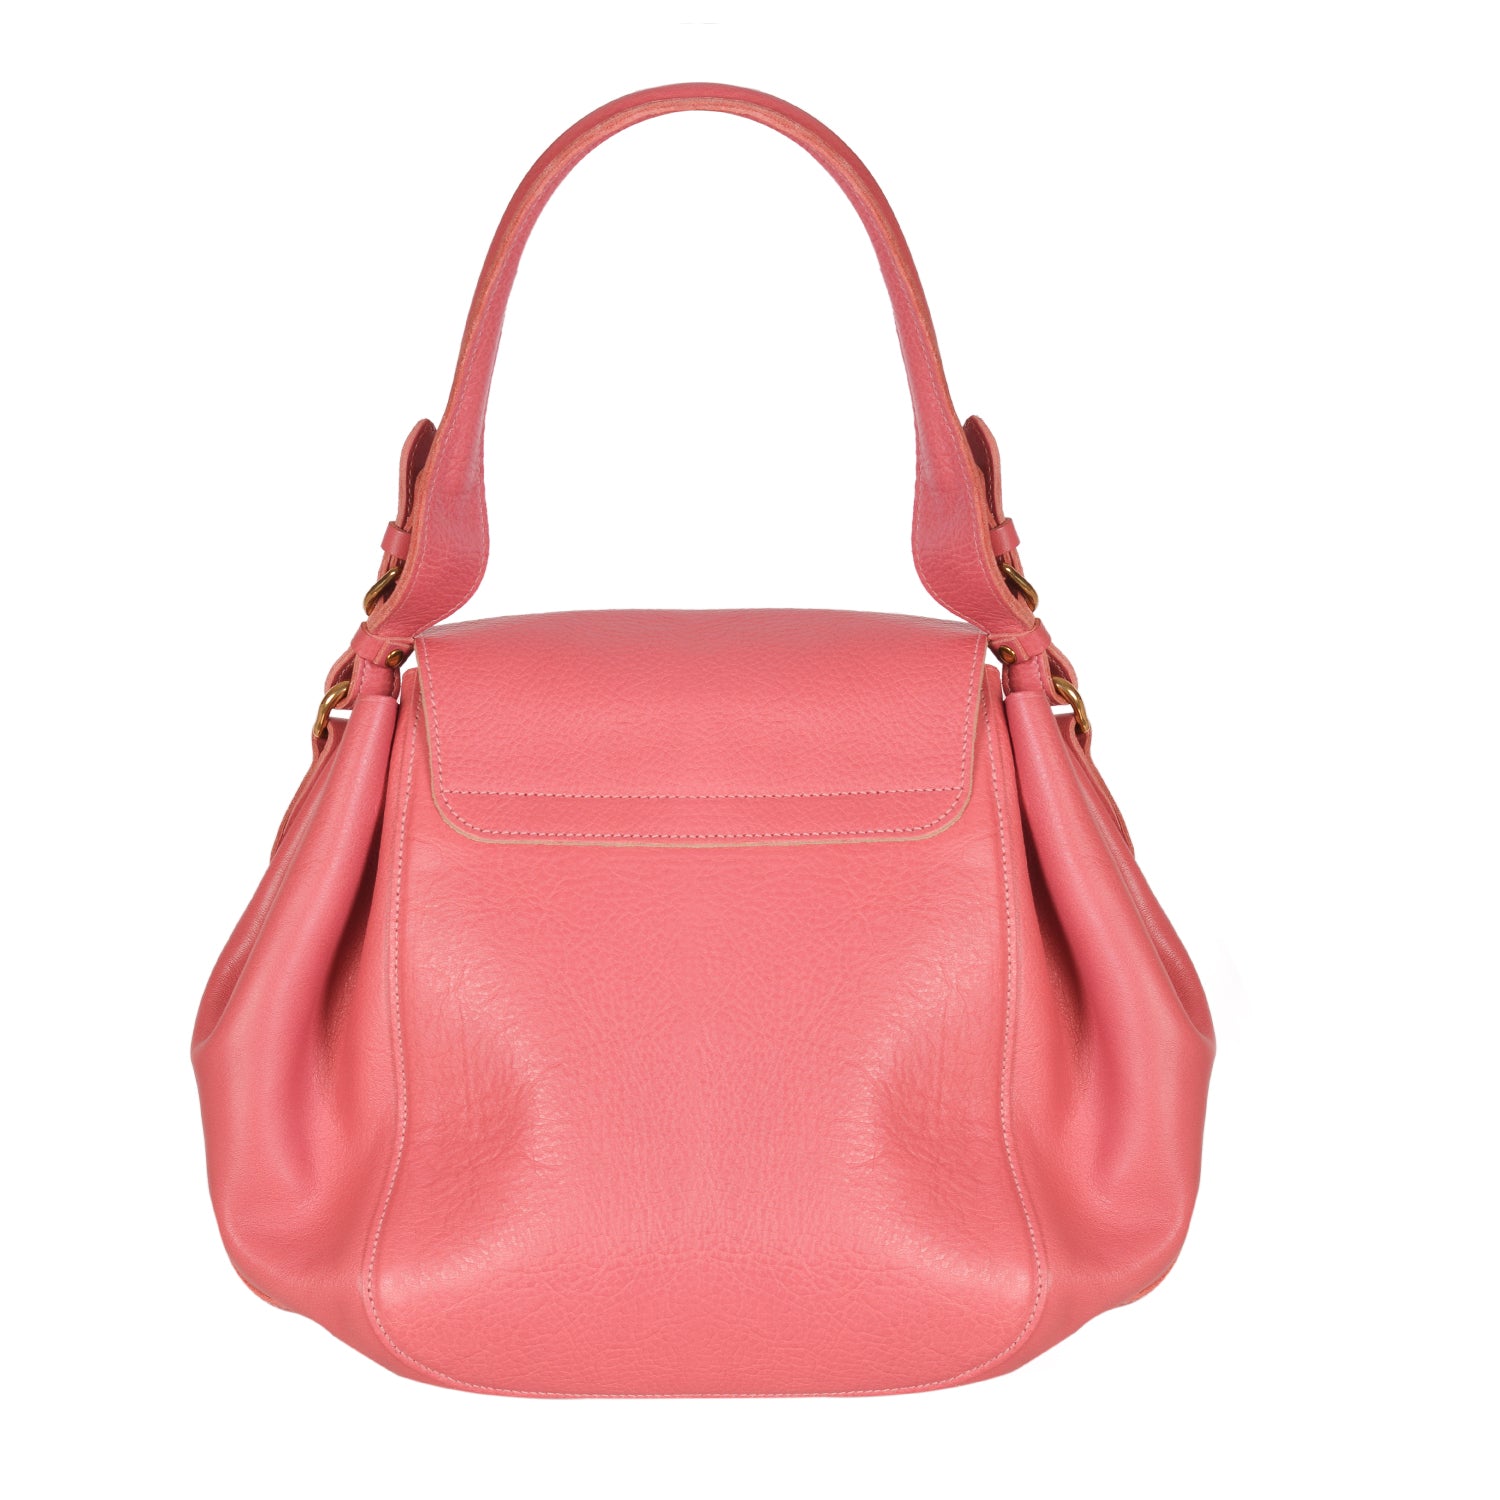 NEW IL BISONTE WOMEN'S CURLY COLLECTION SHOULDER BAG IN PINK LEATHER